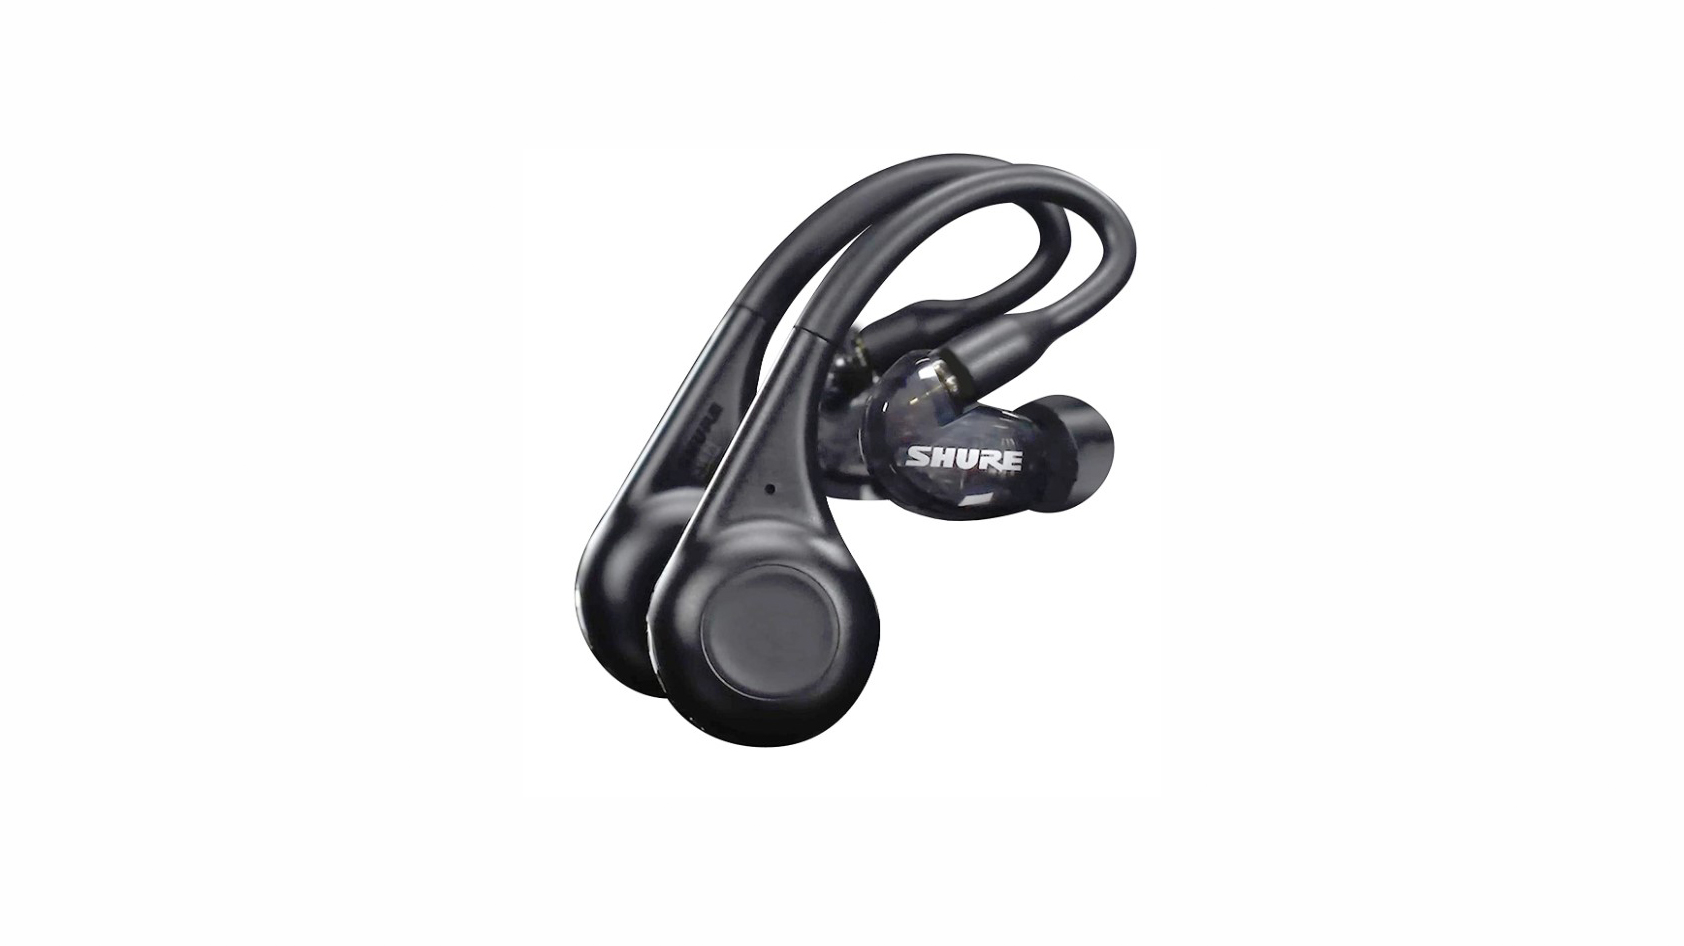 Product image of Shure AONIC 215 Gen 2 in black.